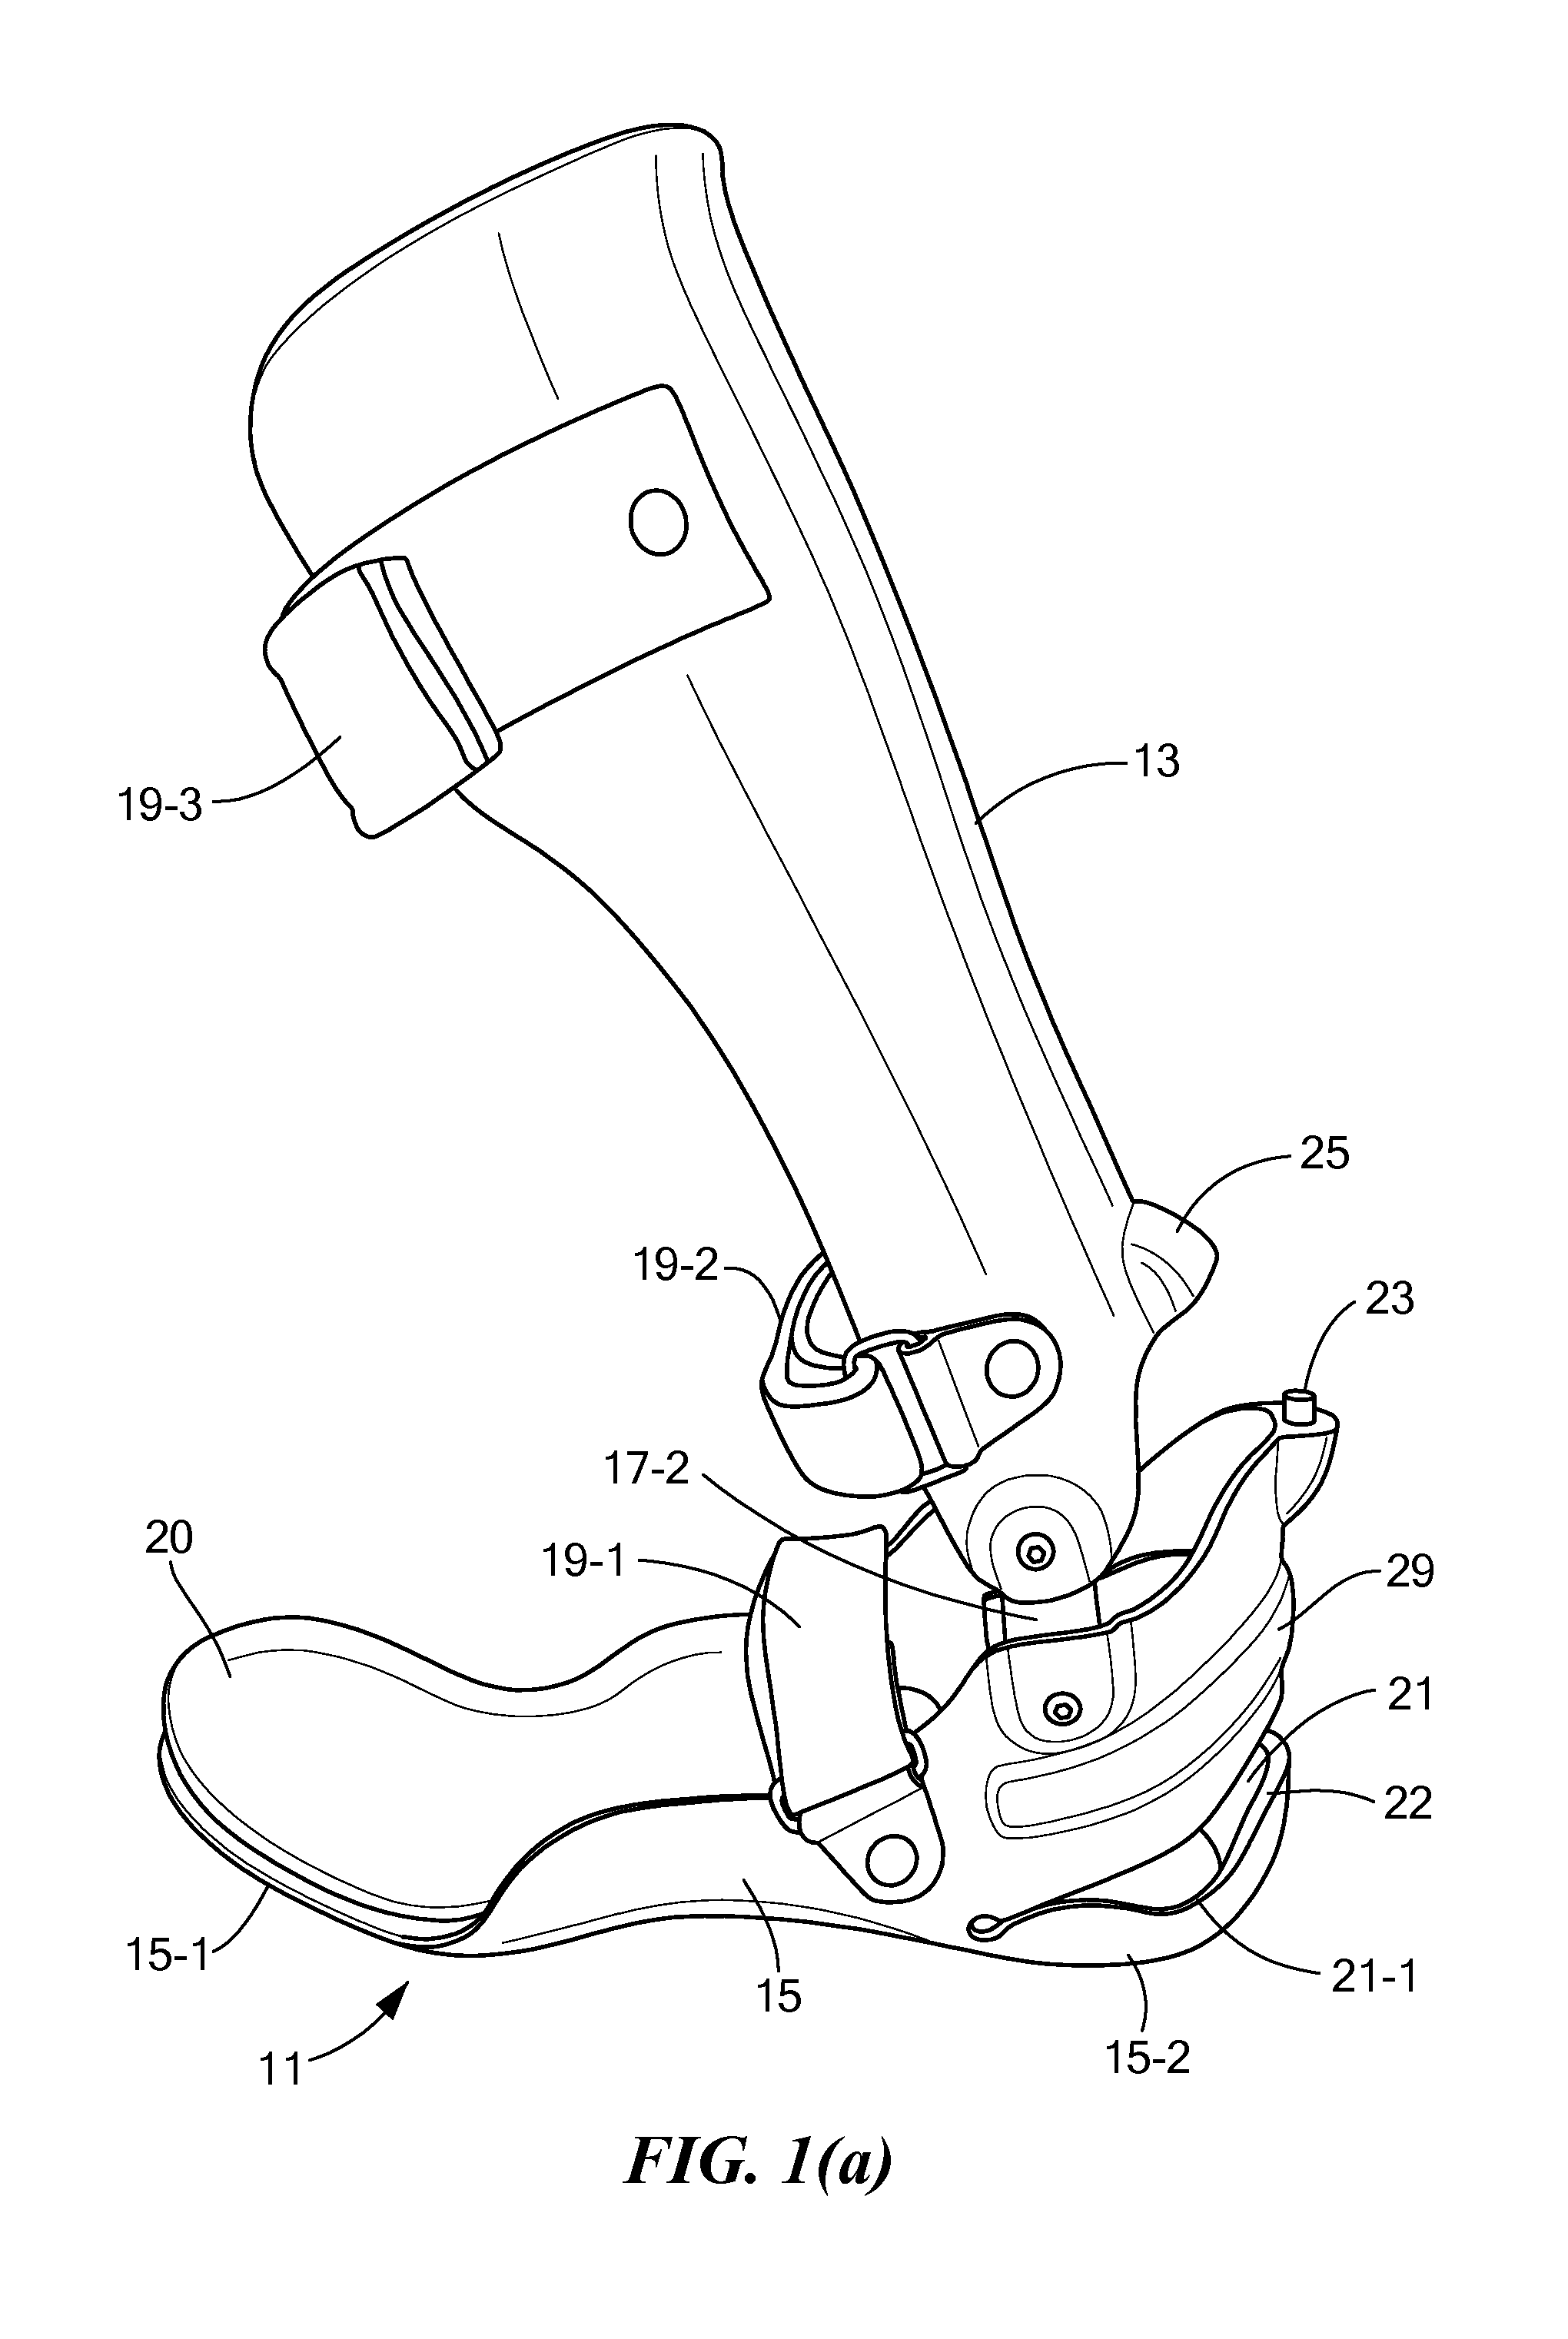 Ankle-foot orthotic